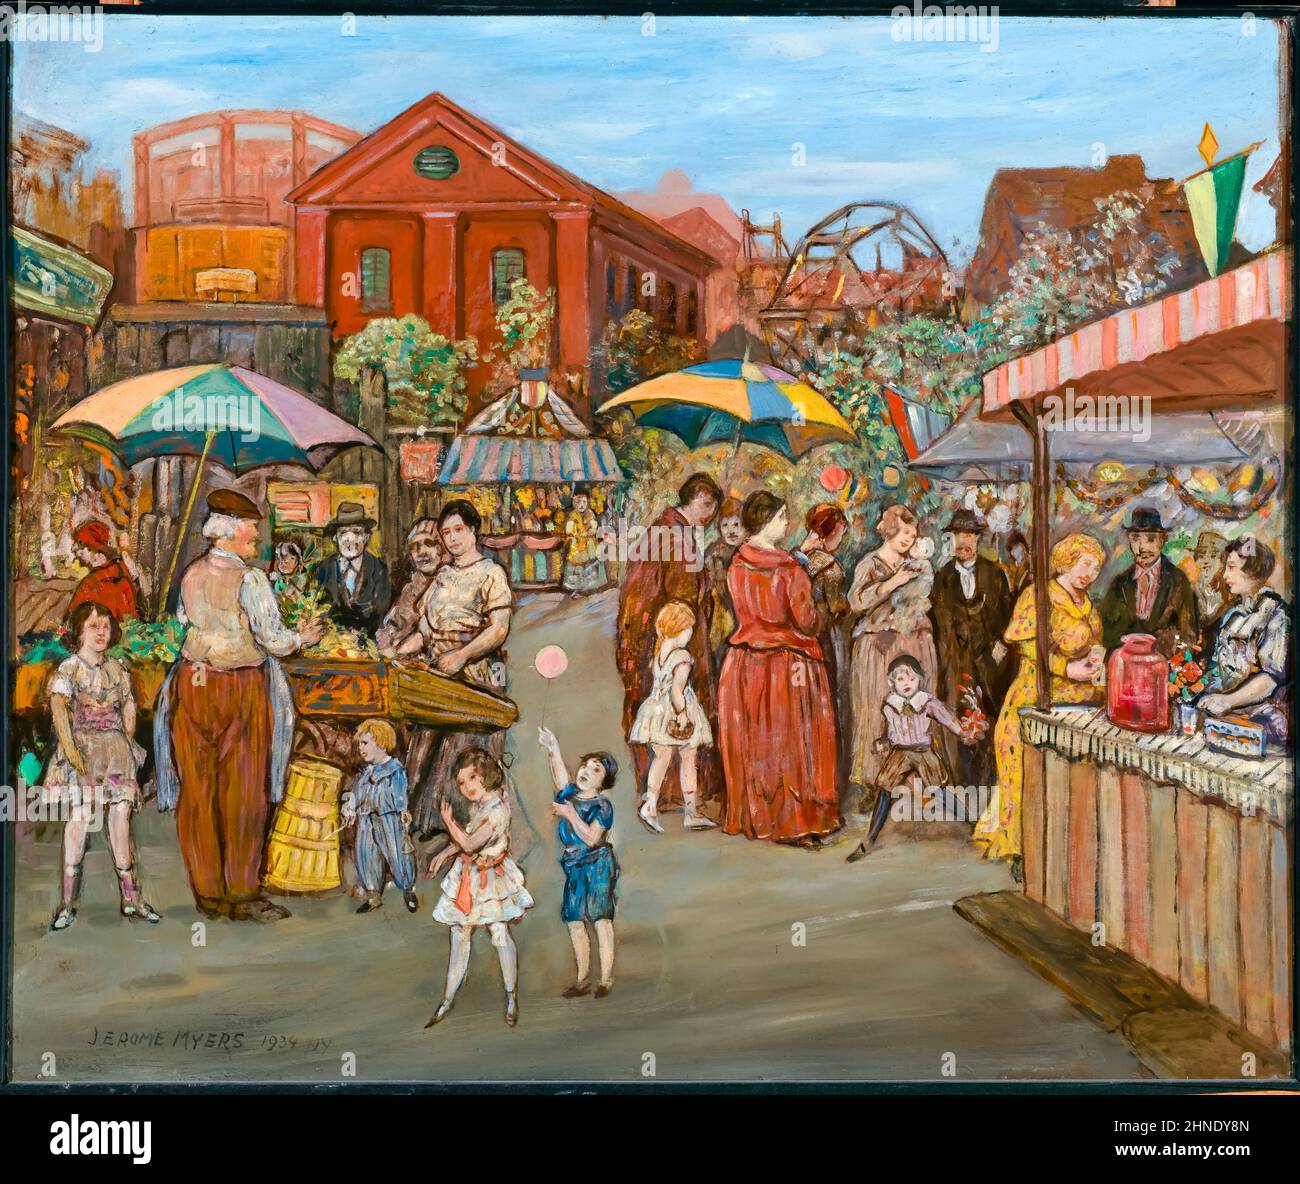 Jerome Myers, Italians in Jefferson Park, (Fair with stalls and stands), painting, oil on fibreboard, 1934 New Deal art Stock Photo